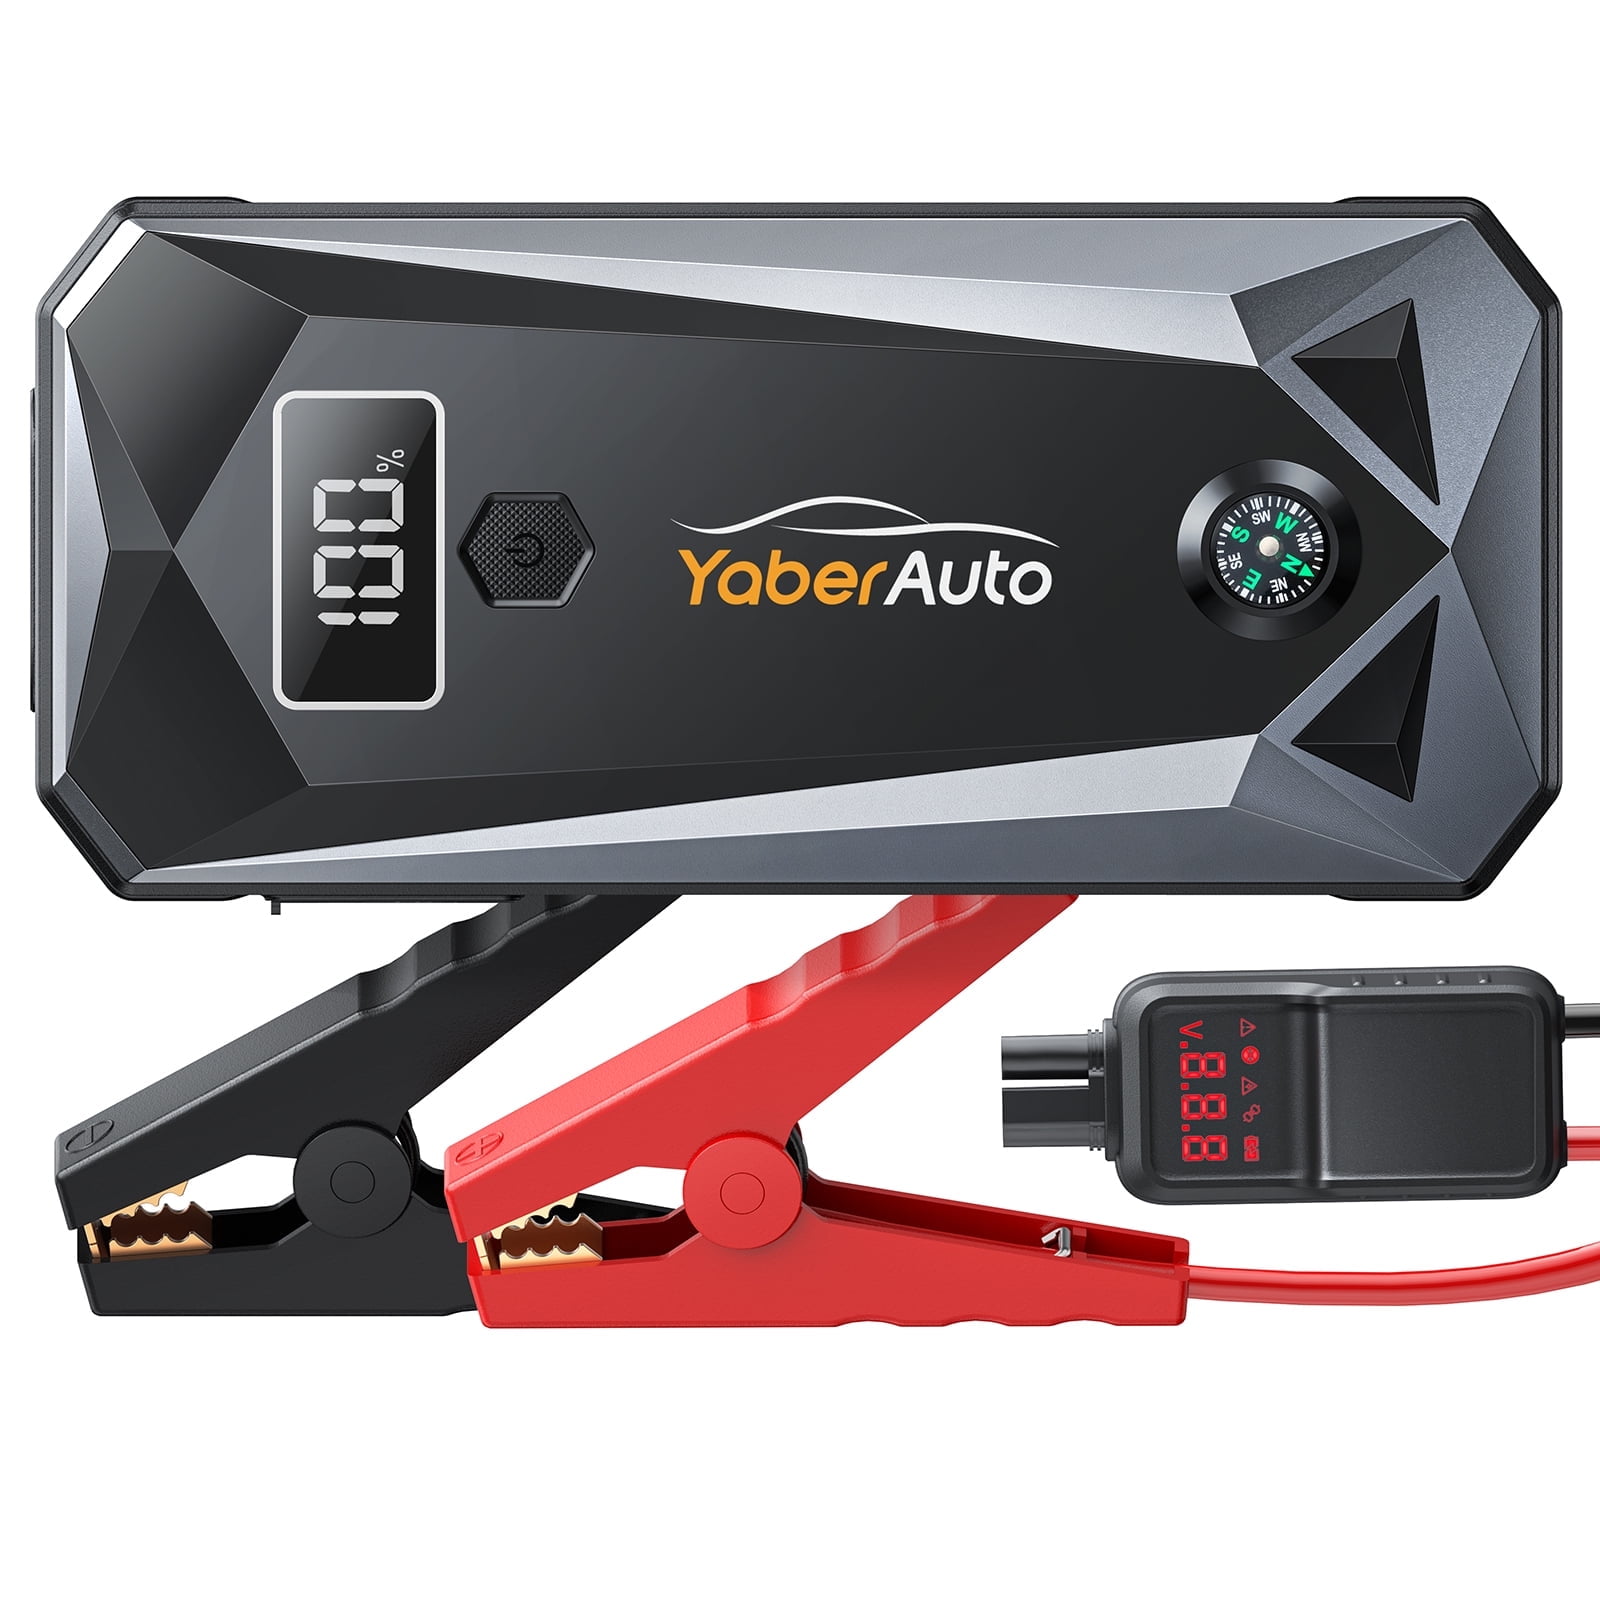 Review of the YaberAuto Car Battery Jump Starter 